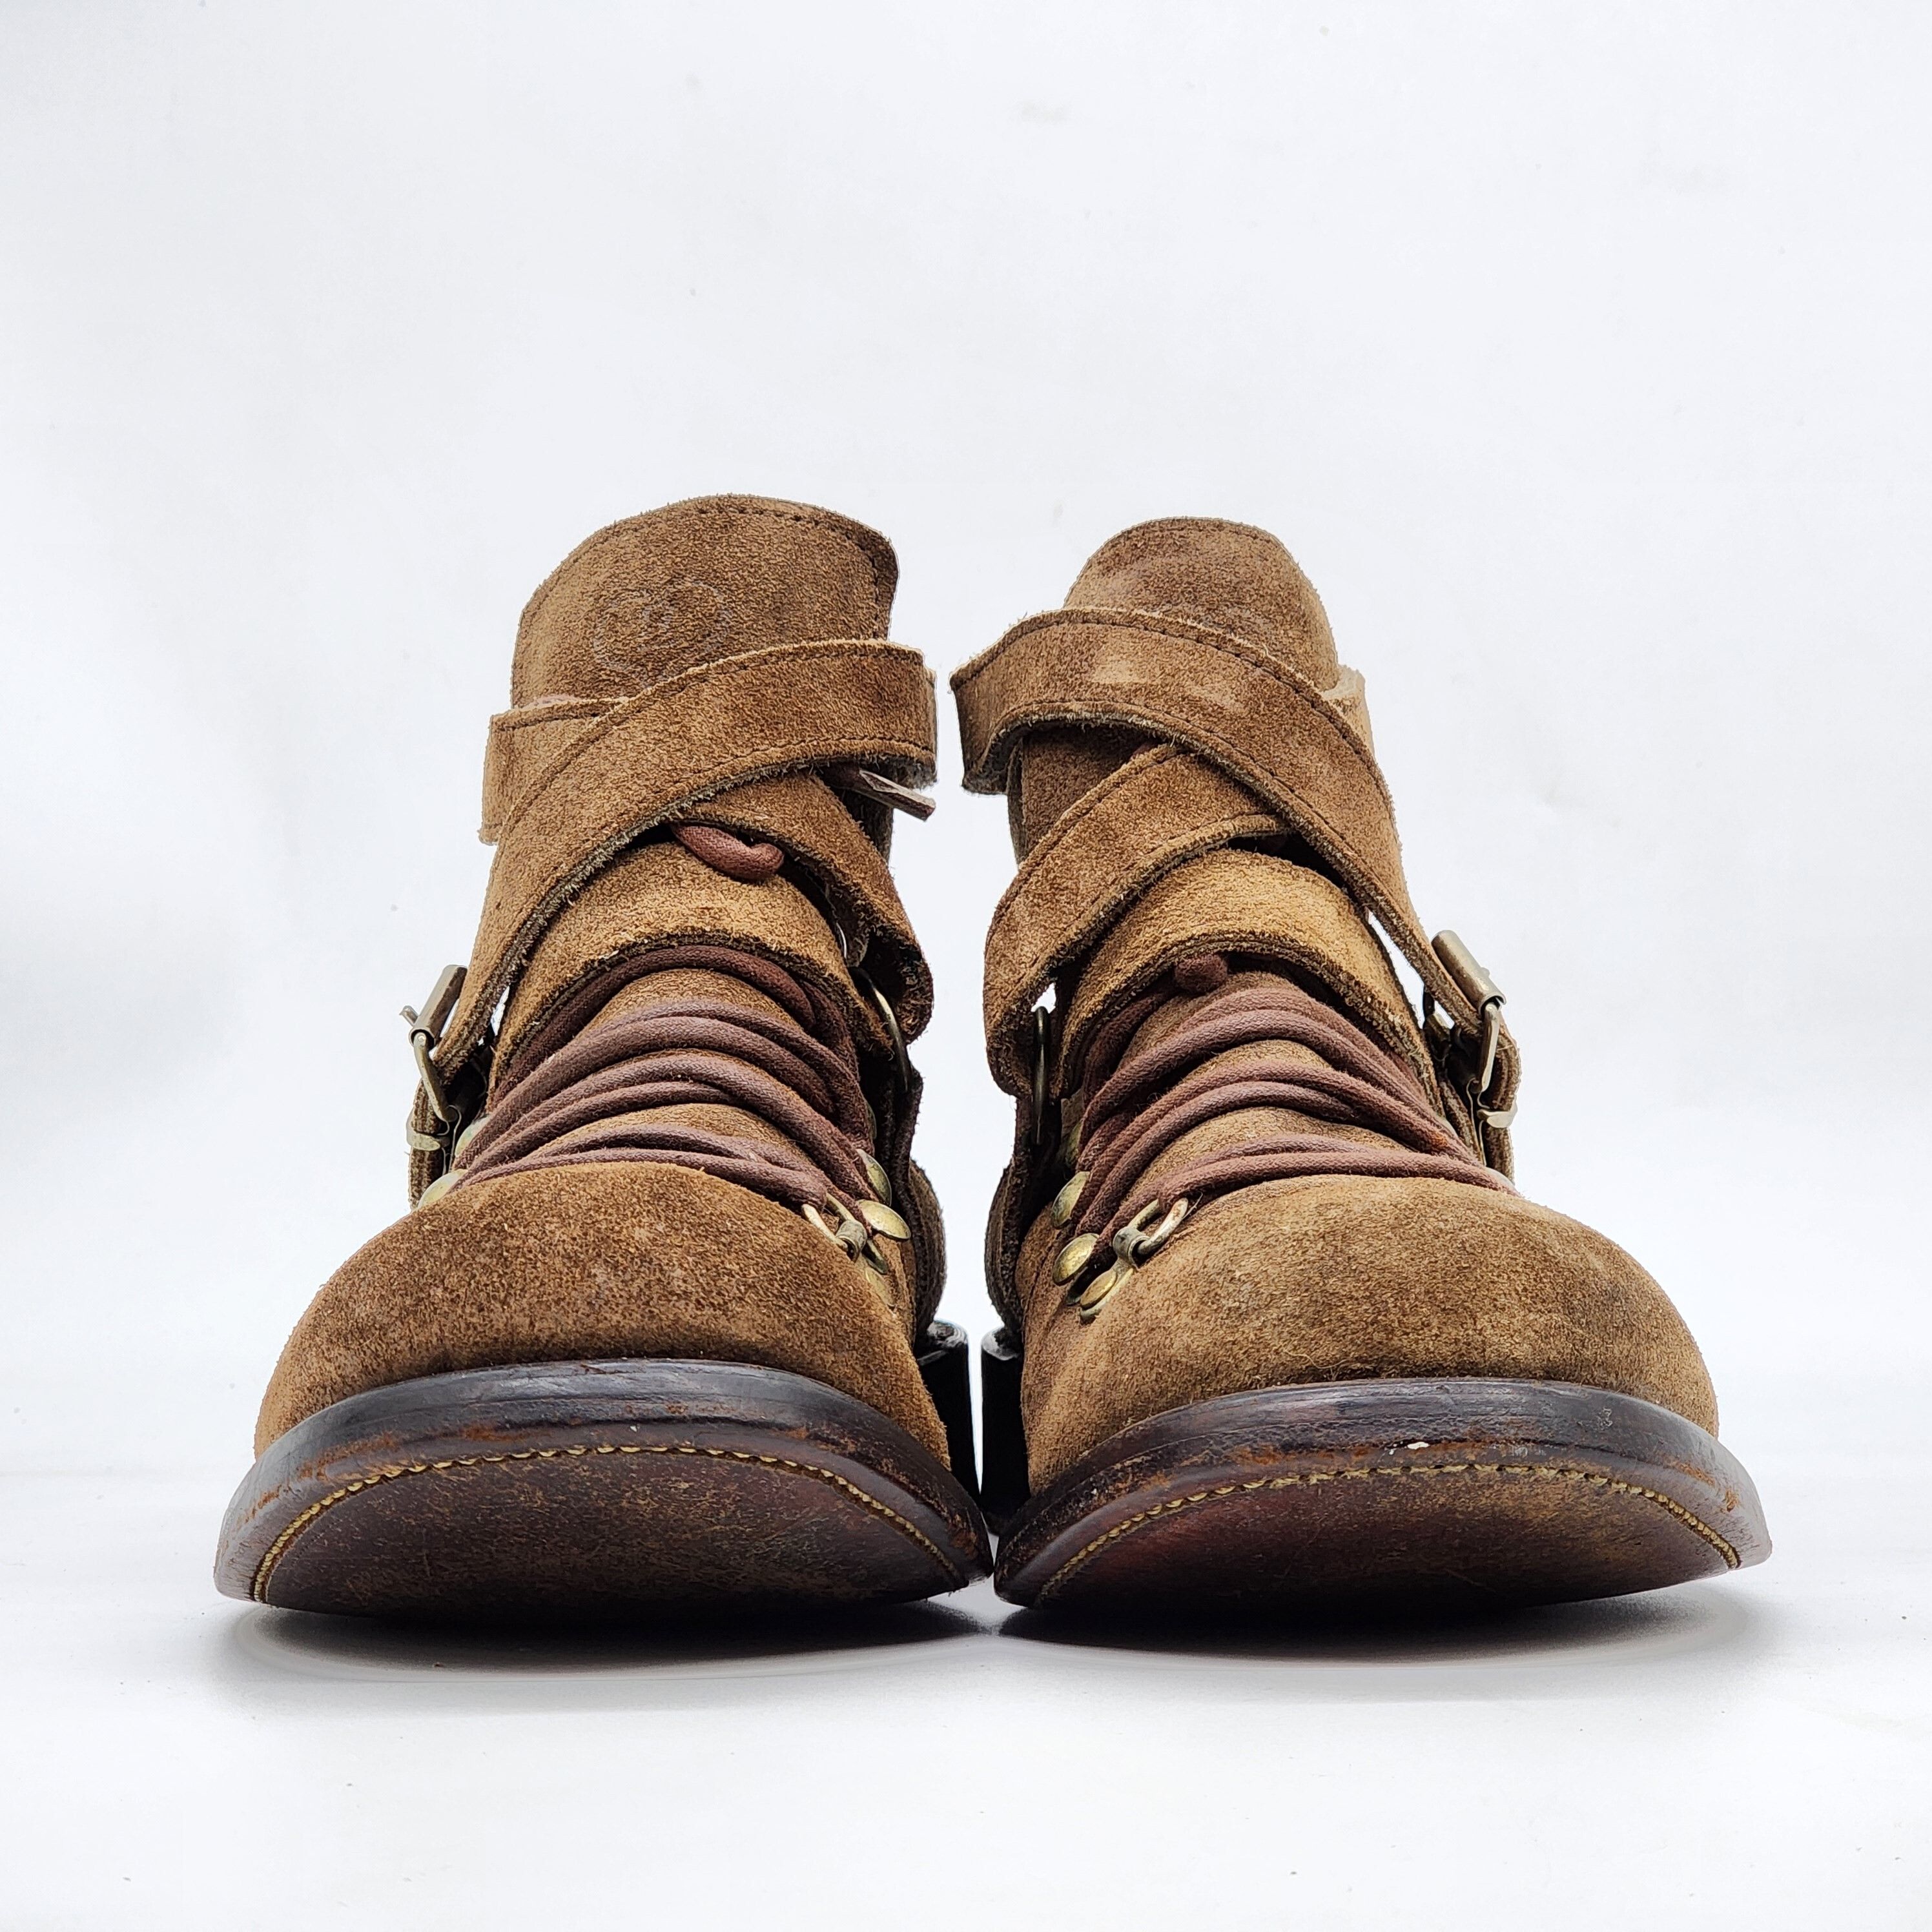 Archival Clothing - Jean Baptiste Rautureau - Archival Strap Hiking Boot - 2